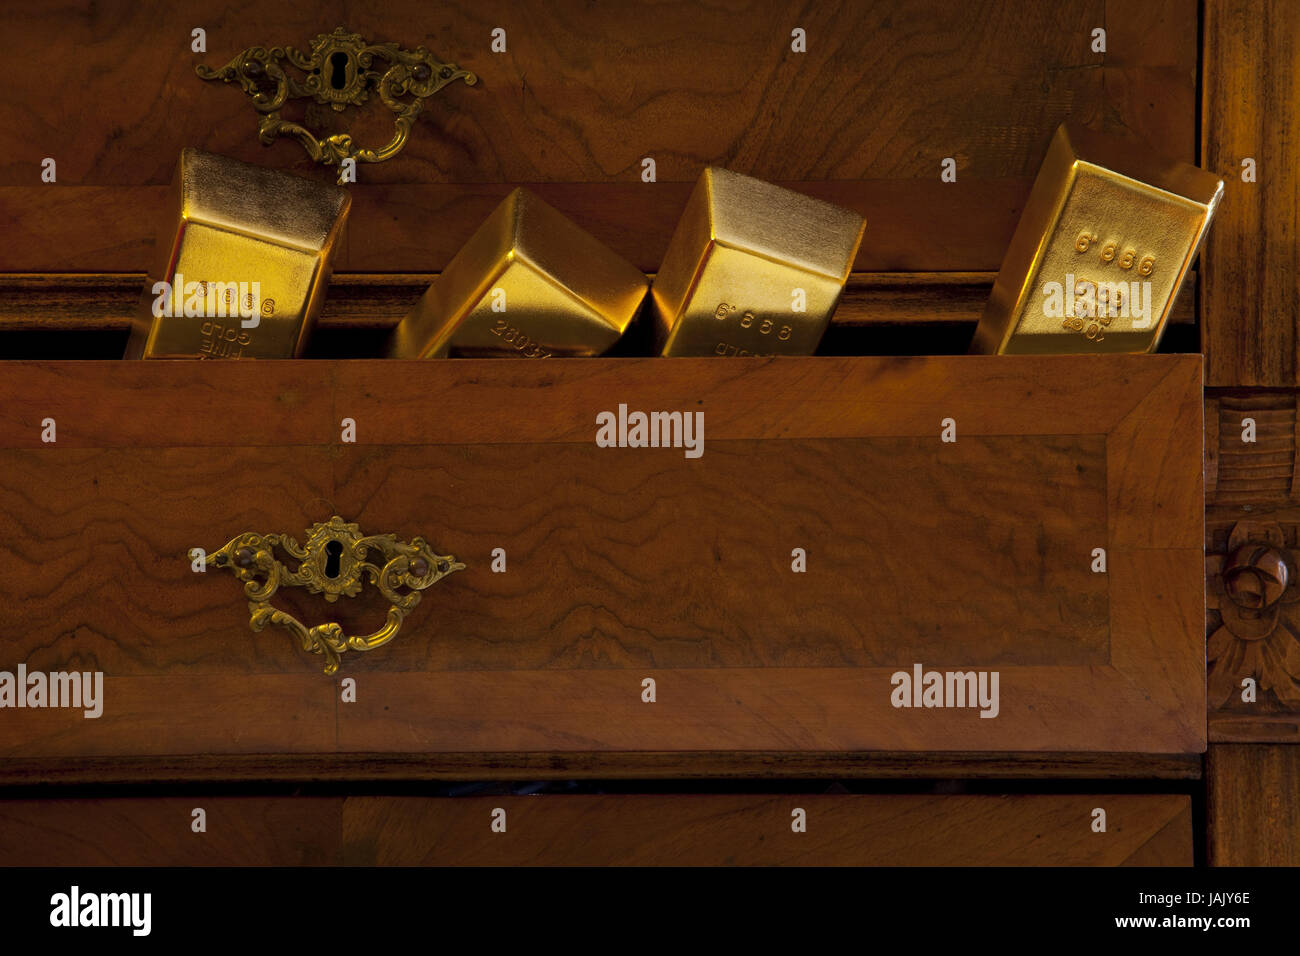 Gold bars,drawer,four,expensive,brilliantly,value,golden price,loss,profit,cupboard,camp down,keep,trust,bank,gold,stamps,purely,purely,frivolously,carelessness,antique,wealth,luxury,richly,uncertainly,chest of drawers,black money,bank crisis,financial crisis, Stock Photo